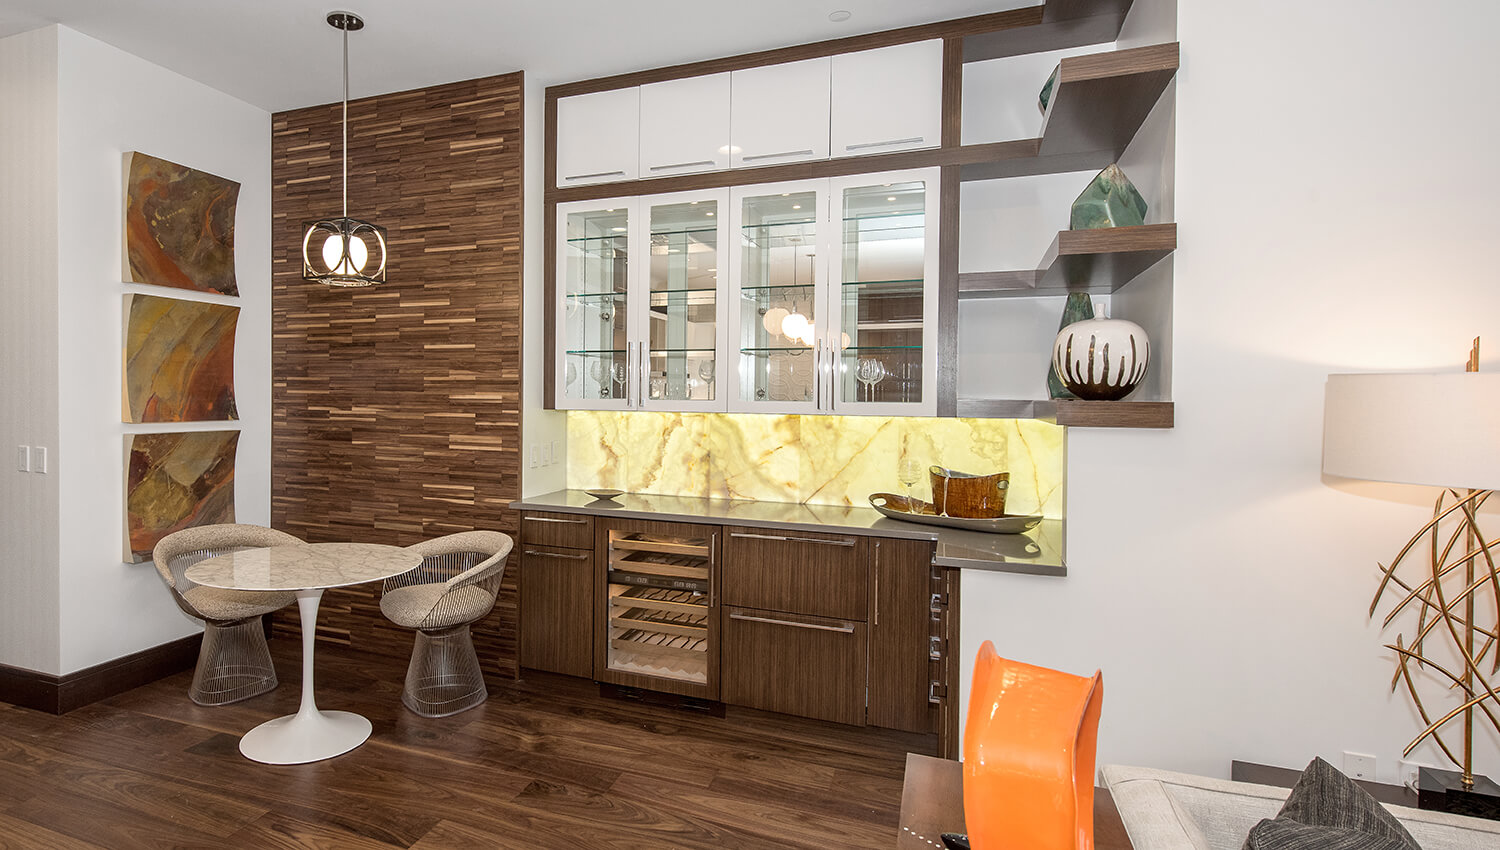 A wet bar area with mid-century modern styled cabinets.